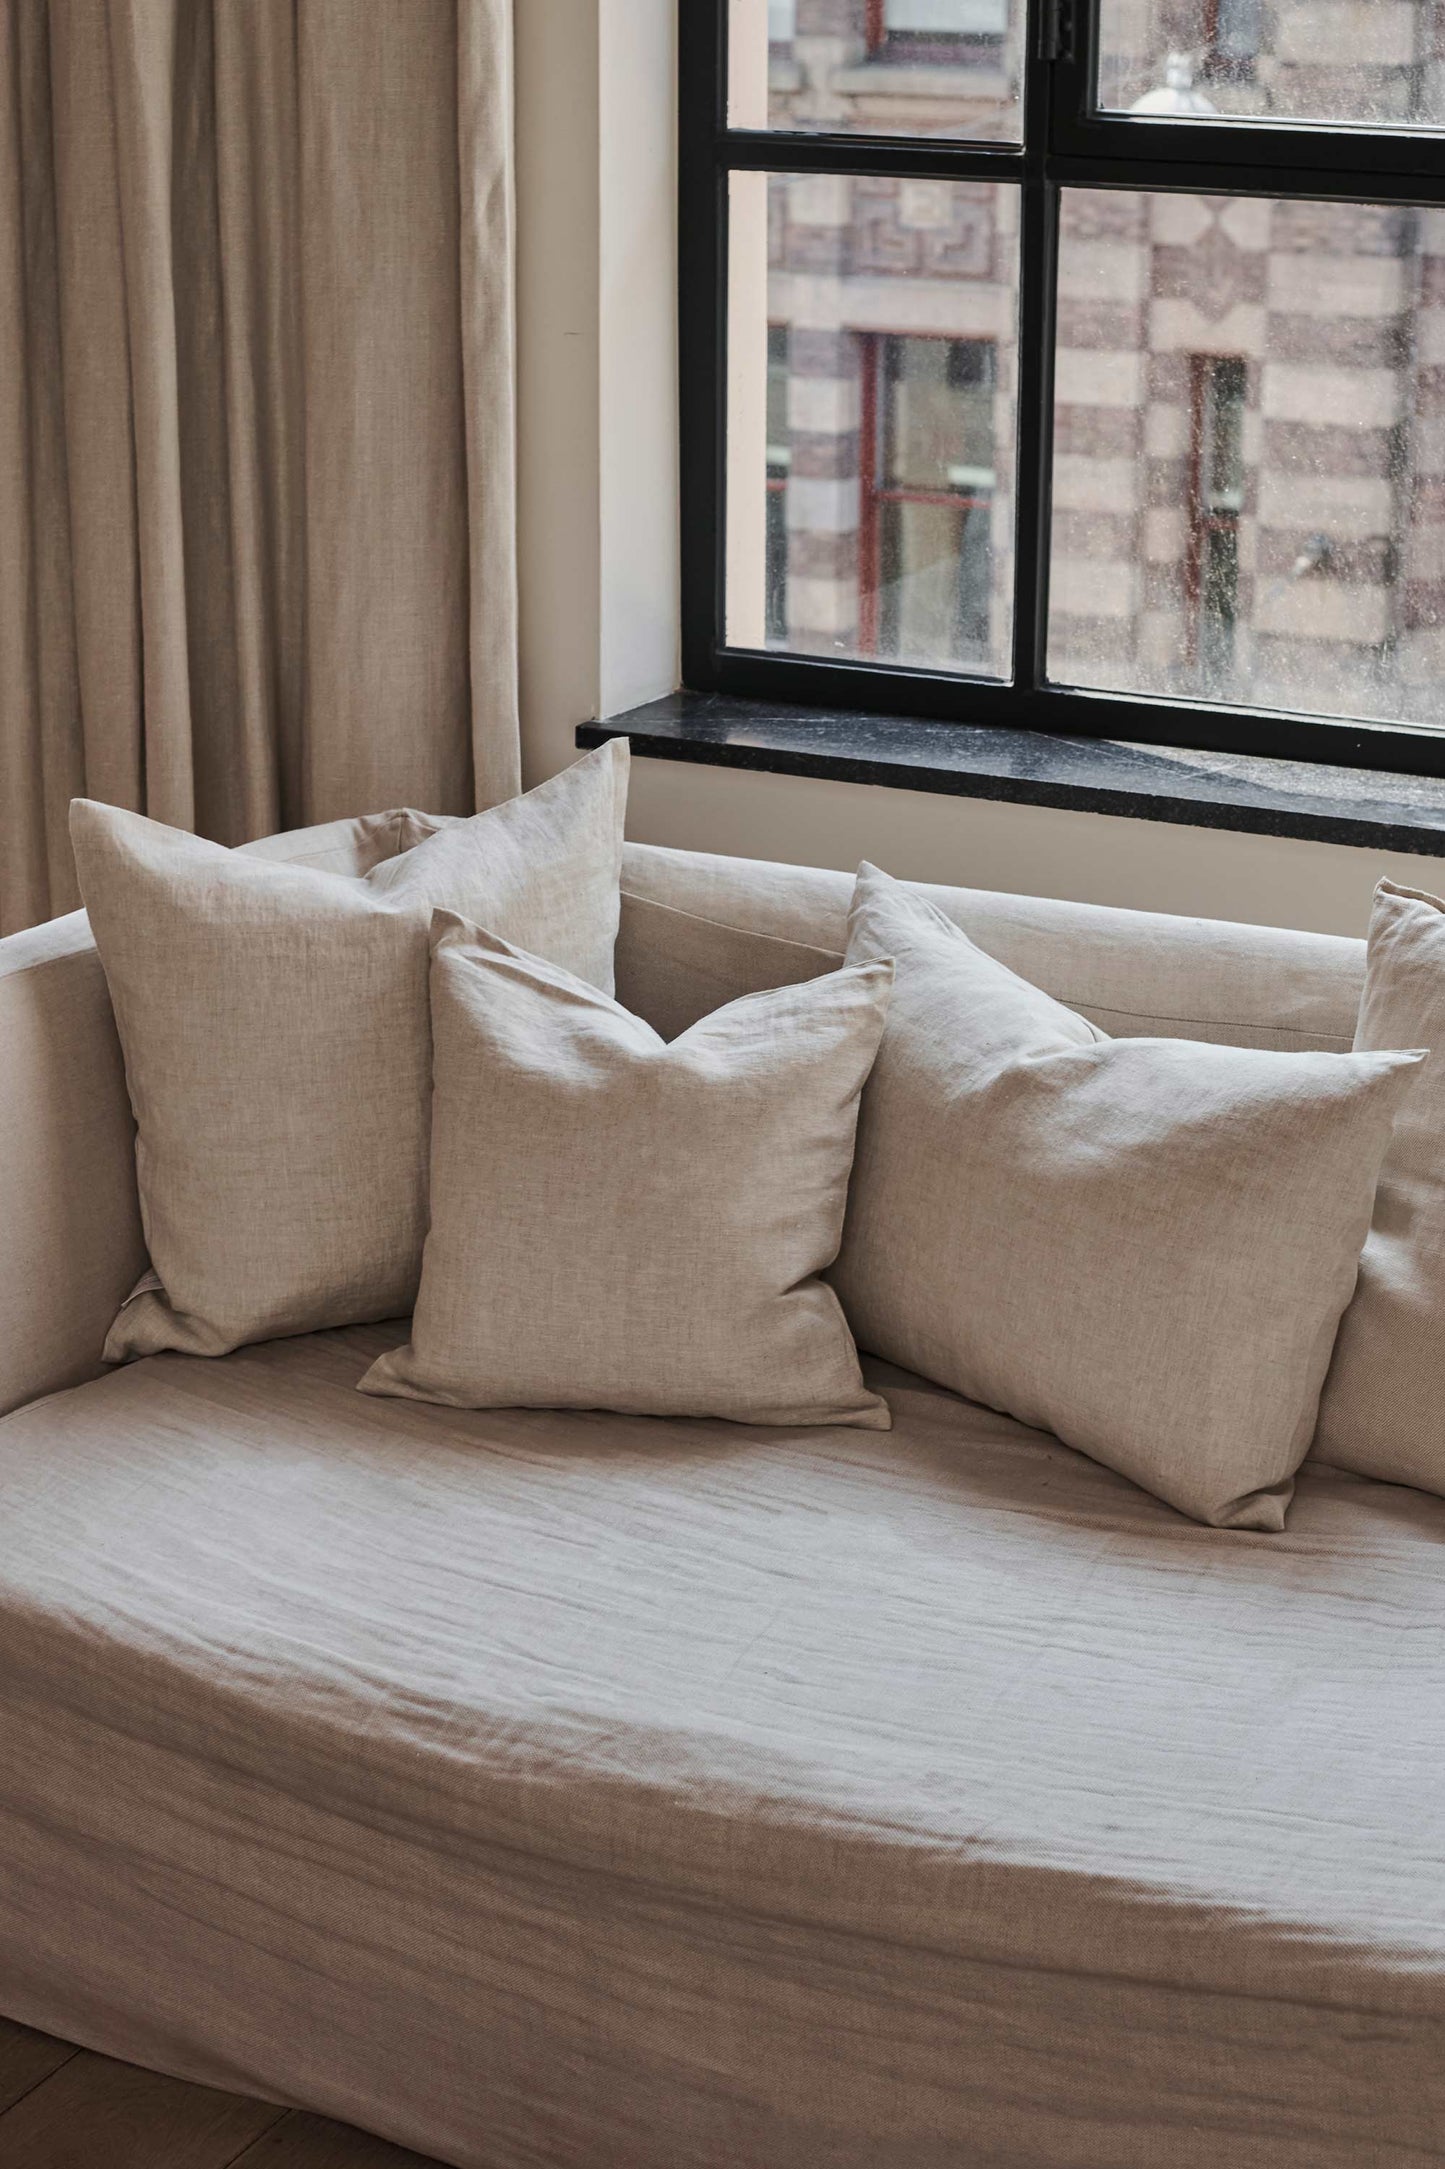 Natural Linen Cushions by Timeless Linen set on couch in a light and neutral interior at Enter The Loft.